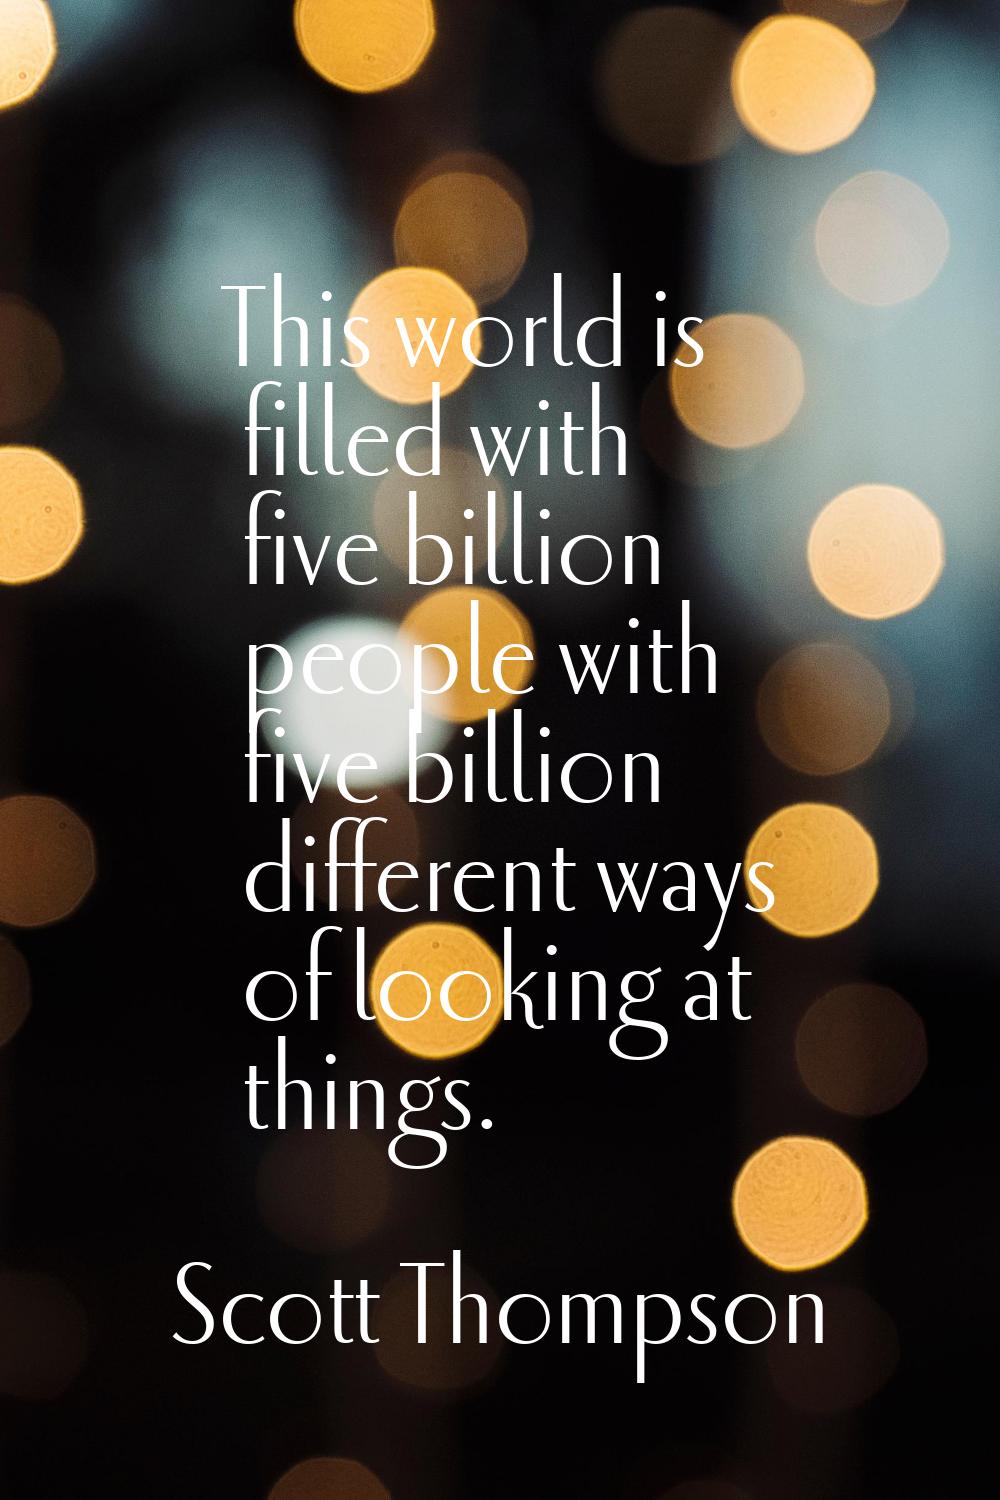 This world is filled with five billion people with five billion different ways of looking at things